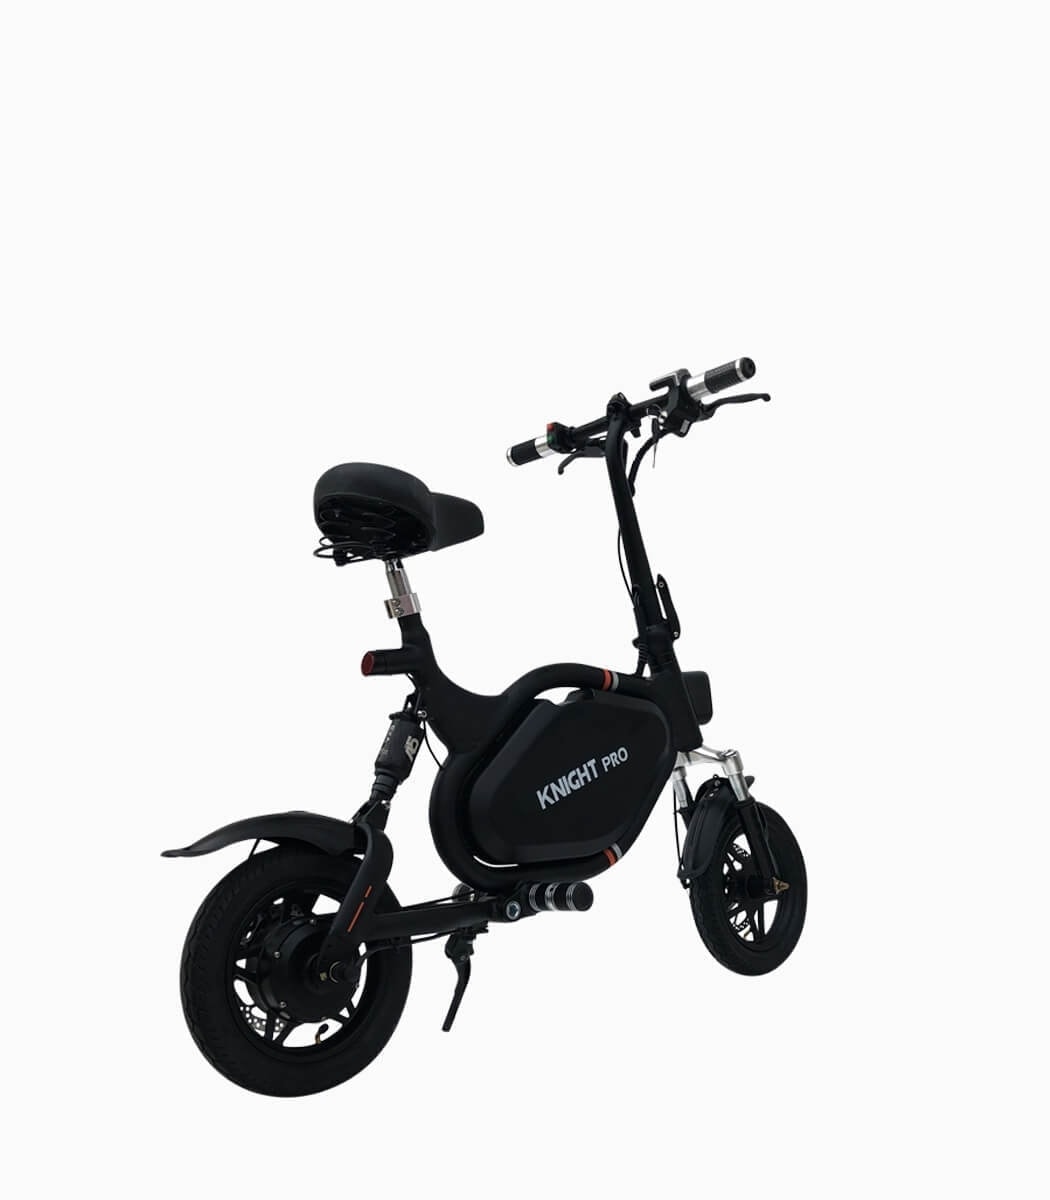 KNIGHT PRO (BLACK17.5AH) UL2272 certified electric scooter rear angled right V1